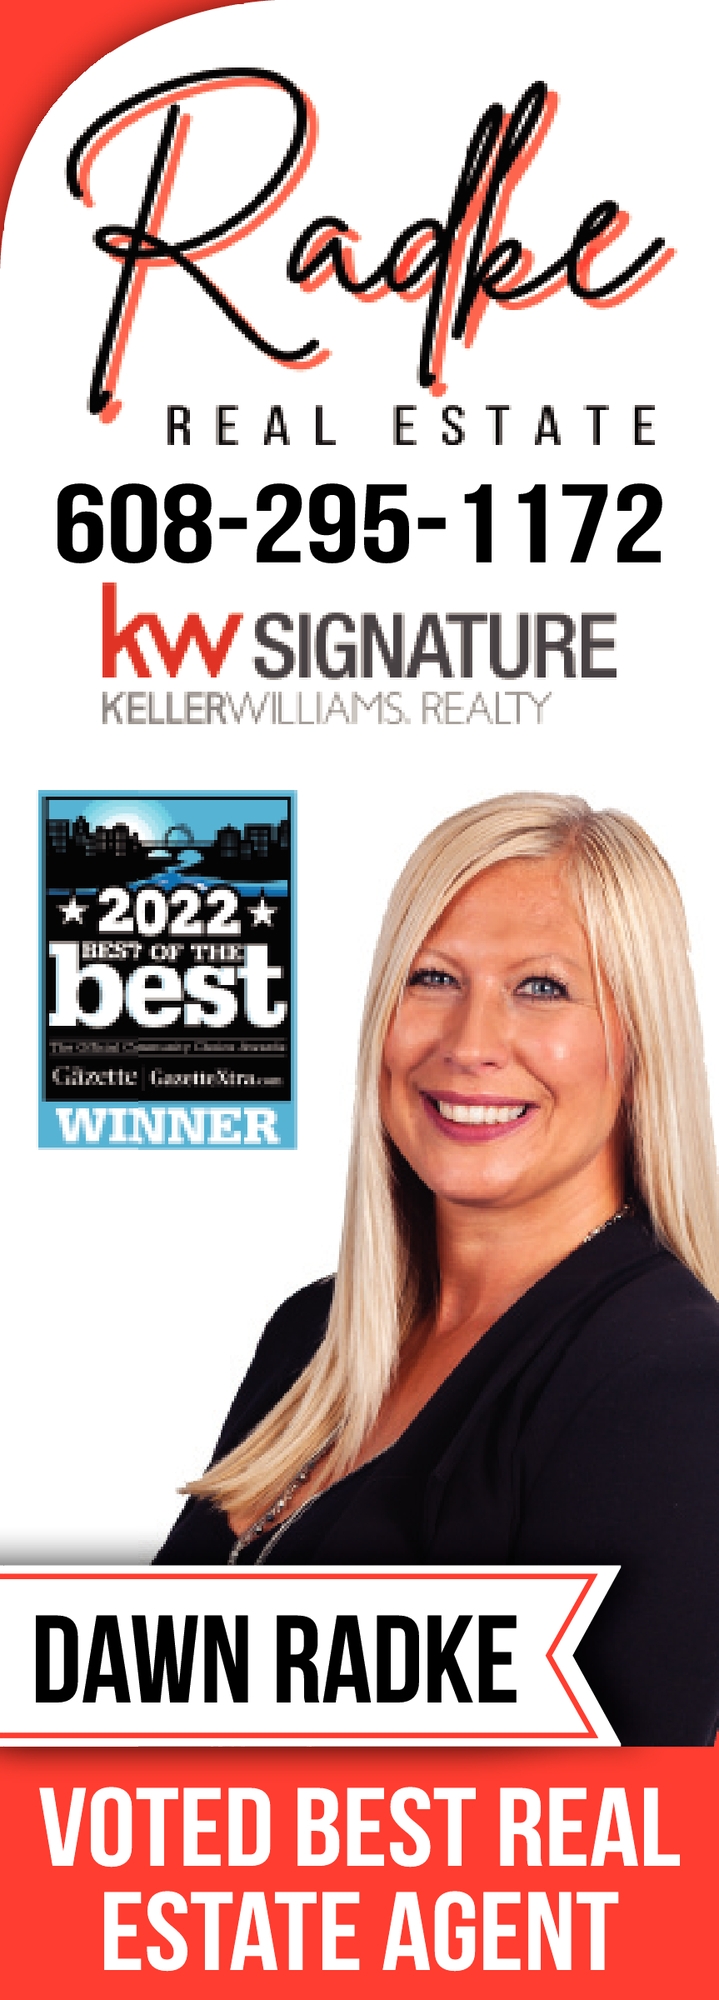 Voted Best Real Estate Agent